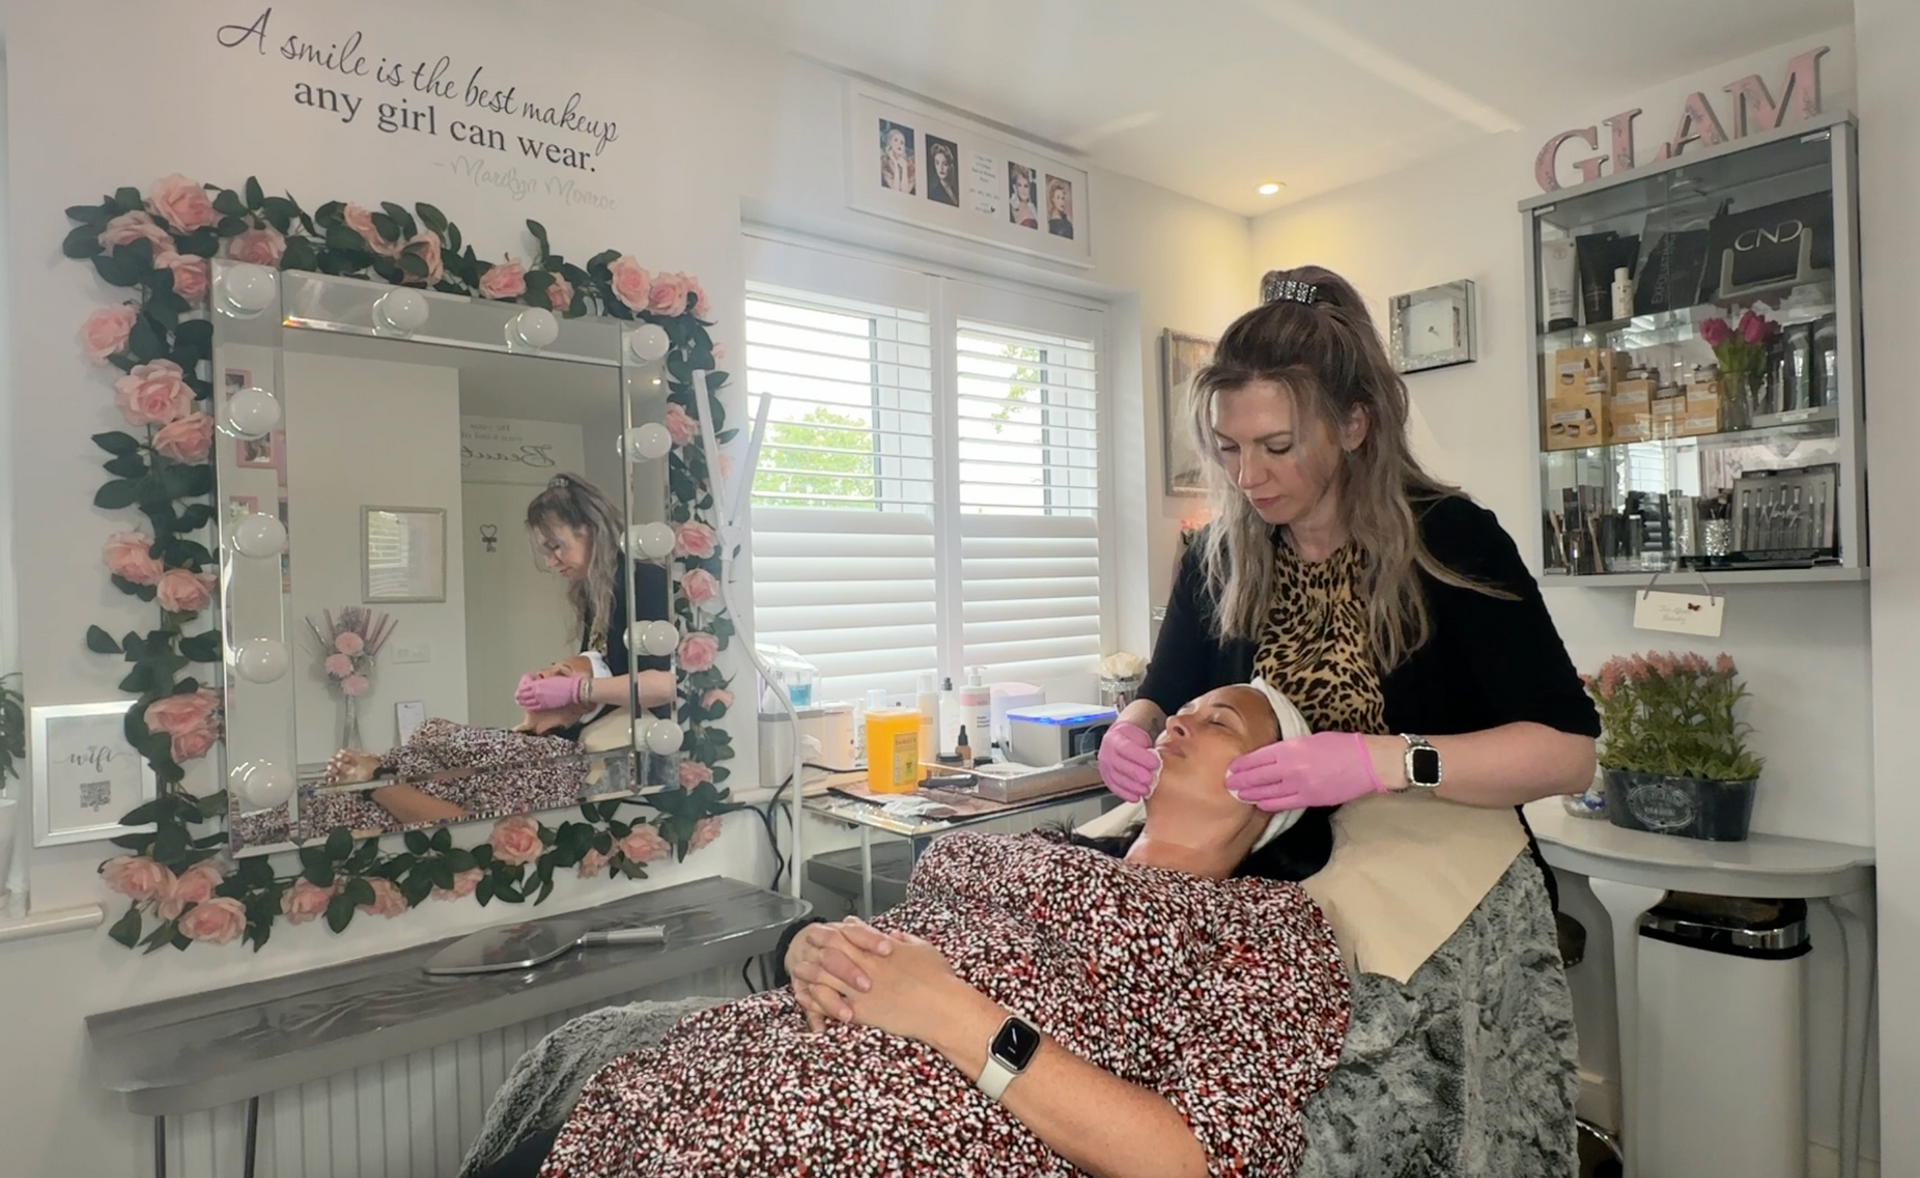 Jax-Glam Beauty preforming beauty treatment in her home salon in Lyde Green